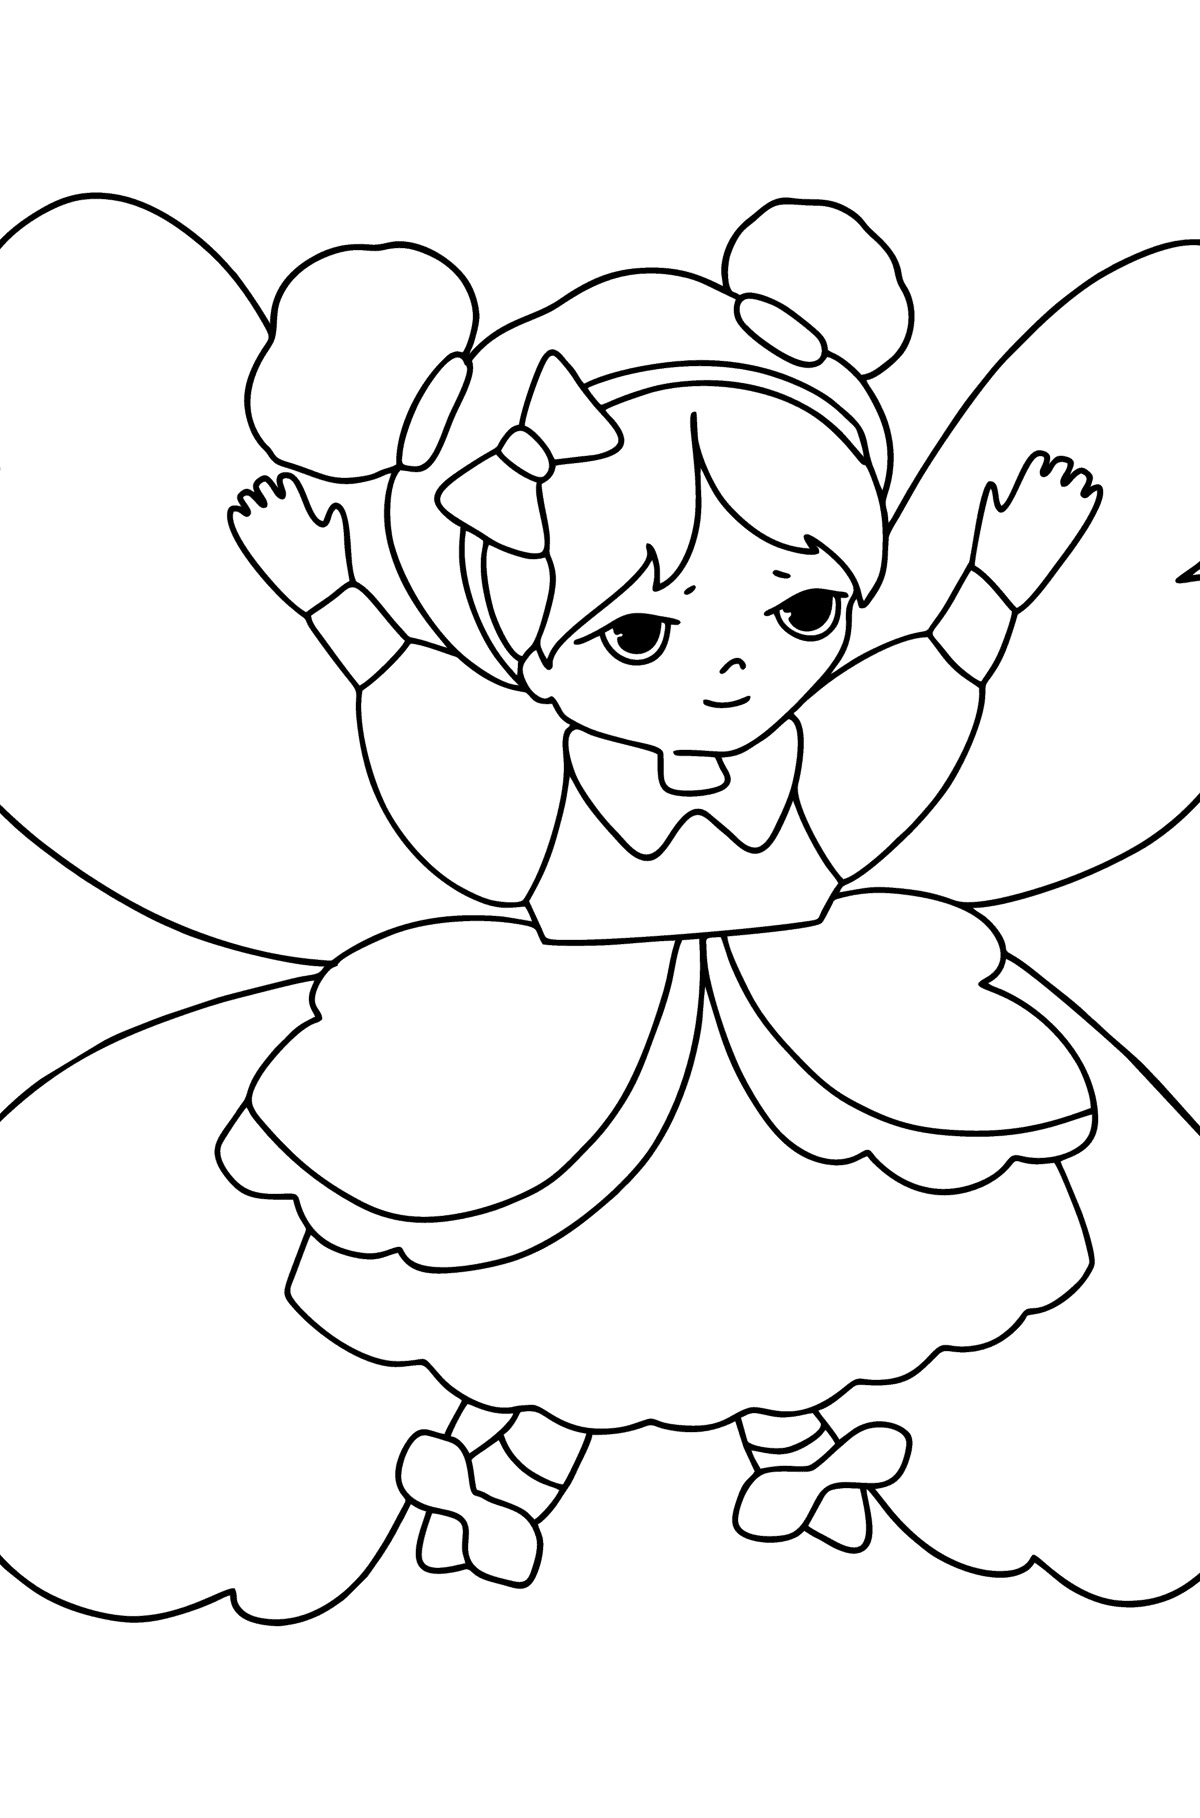 Flying Fairy coloring page - Coloring Pages for Kids